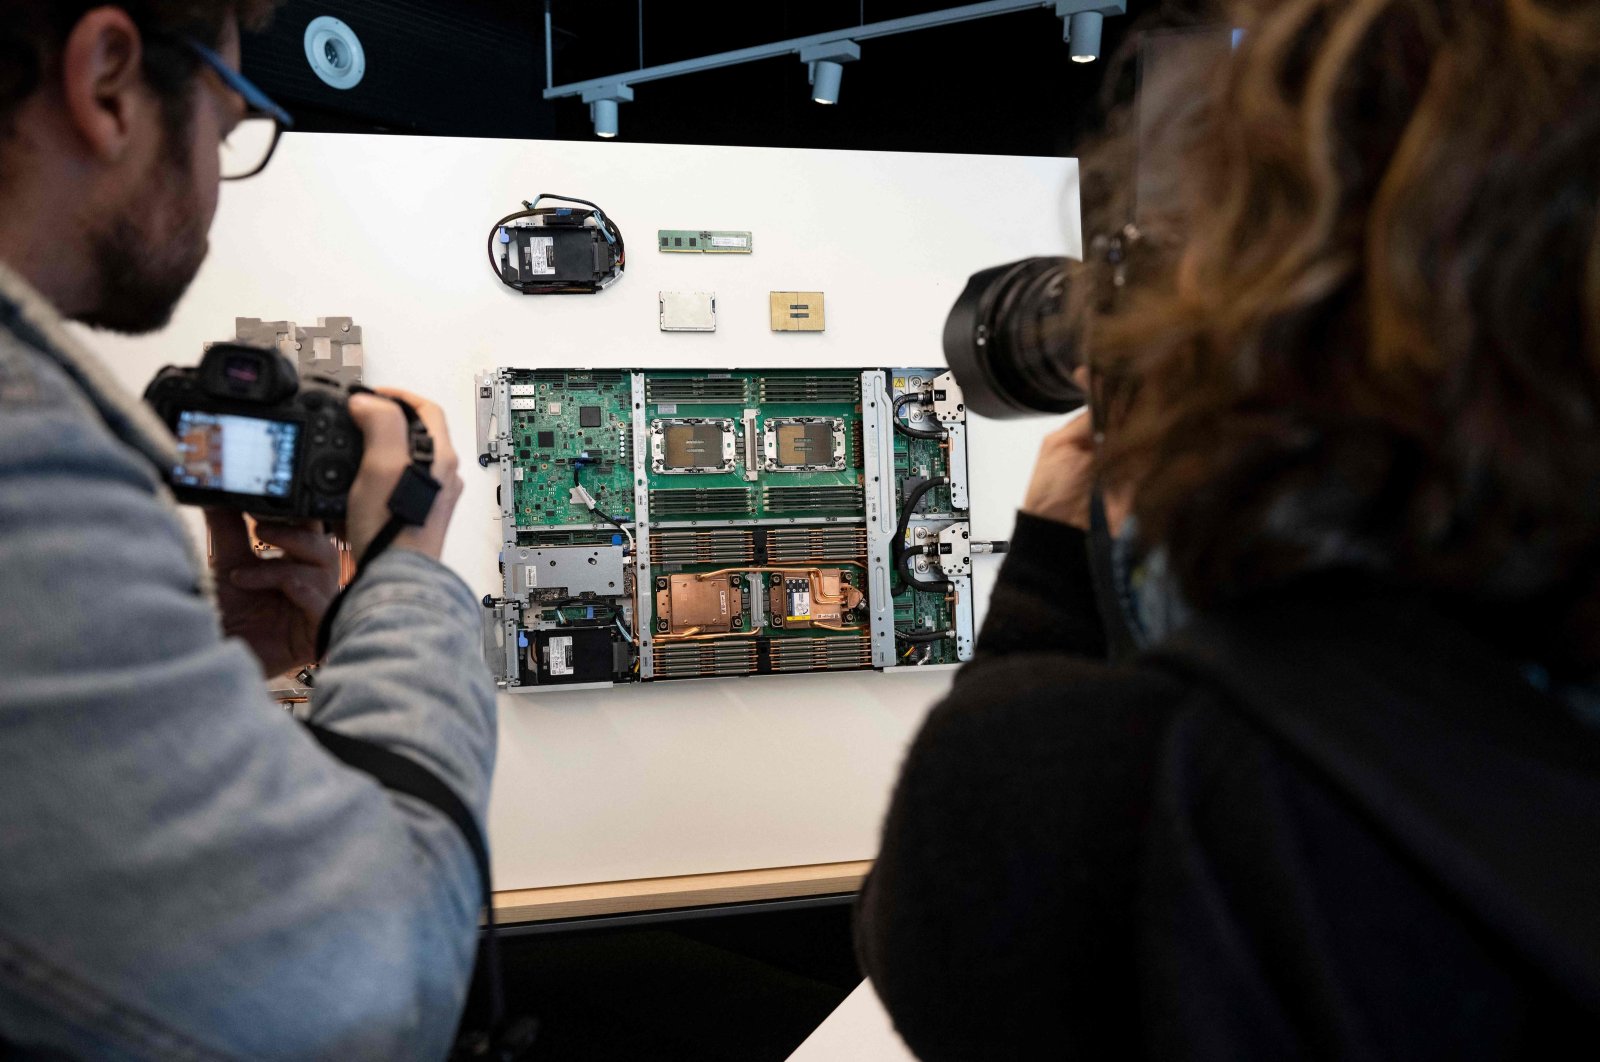 Journalists take pictures of components of the MareNostrum 5 supercomputer, during a press visit of the Supercomputing Centre in Barcelona, Spain, Dec. 15, 2023. (AFP Photo)